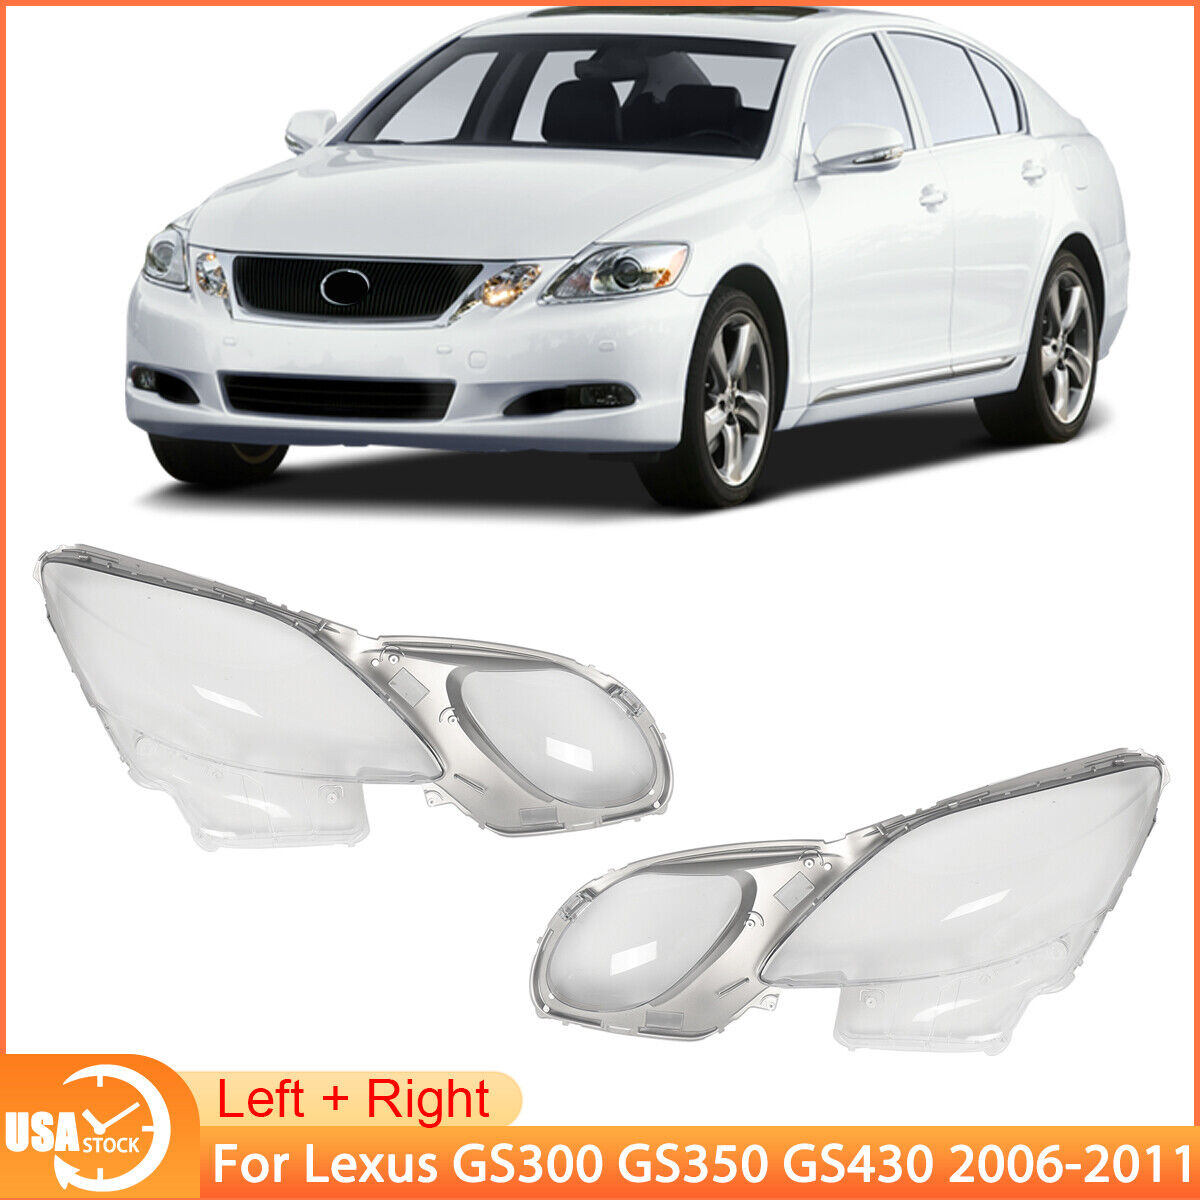 For Lexus GS300 GS350 GS450h 2004-2011 Left & Right Headlight Lens Cover Clear